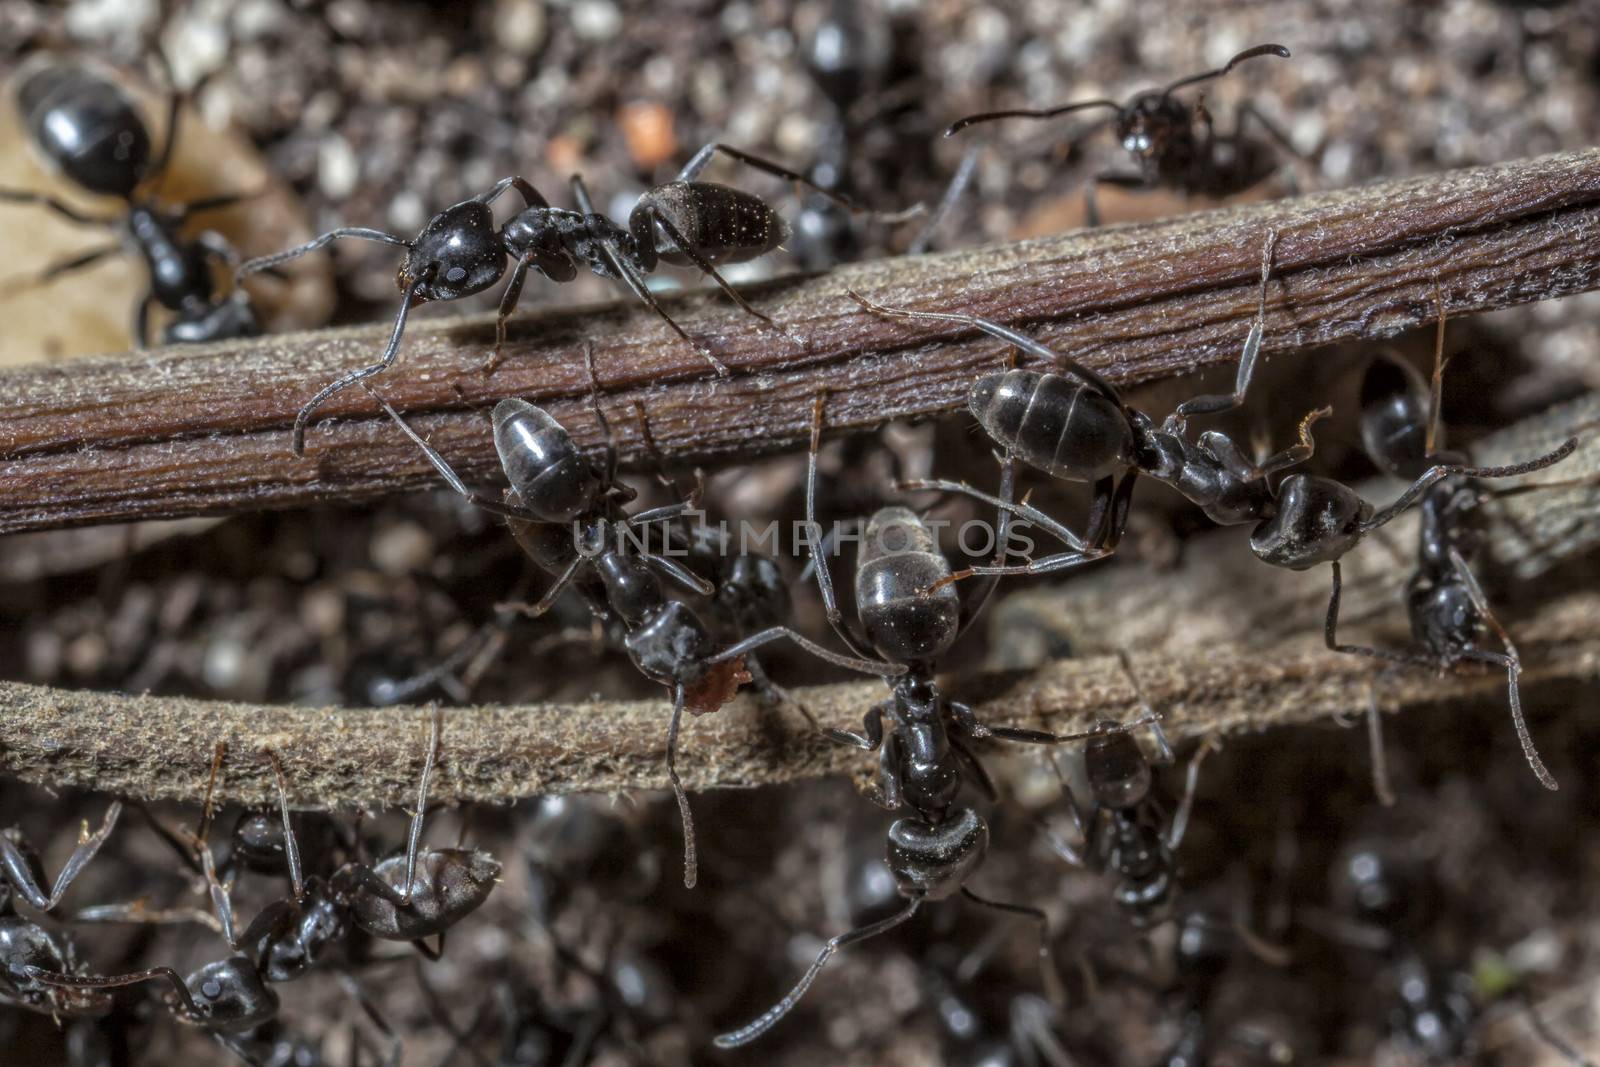 The black garden ant (Lasius niger) is a formicine ant, the type species of the subgenus Lasius, found all over Europe